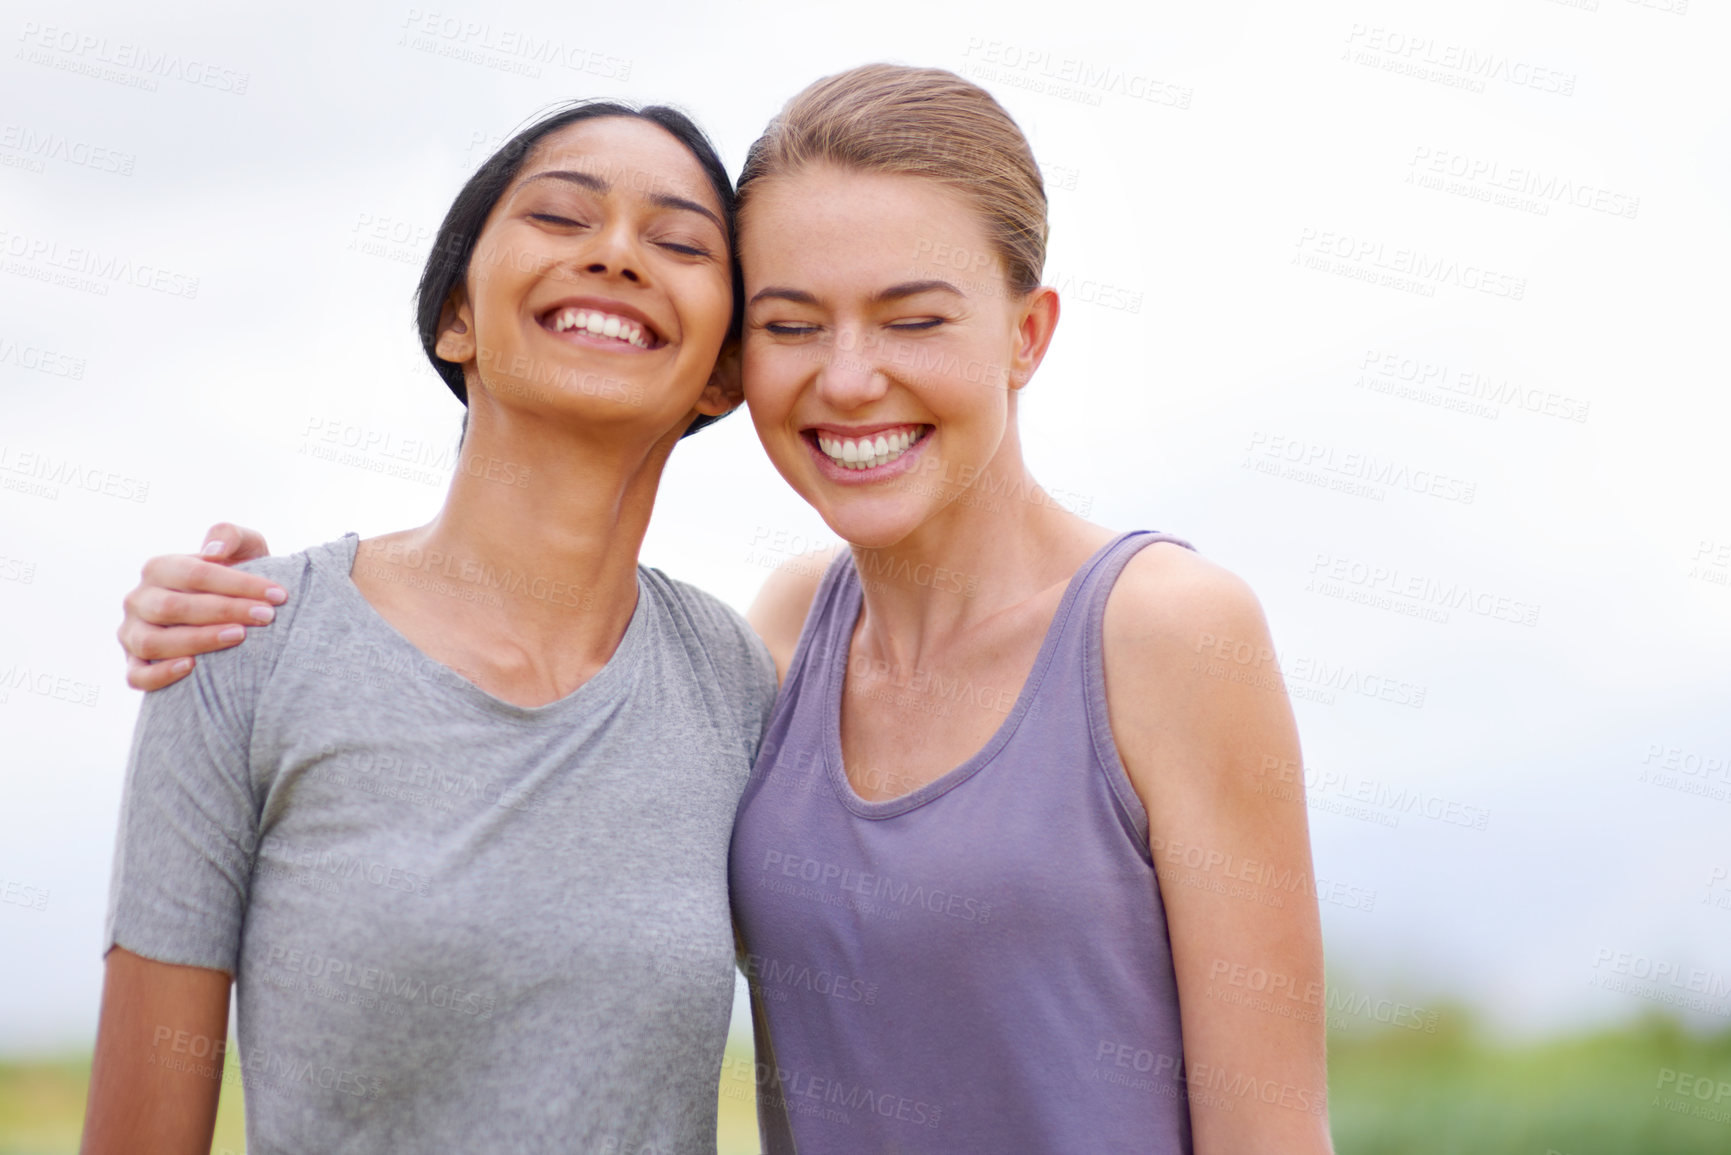 Buy stock photo Two young ladies laughing with each other